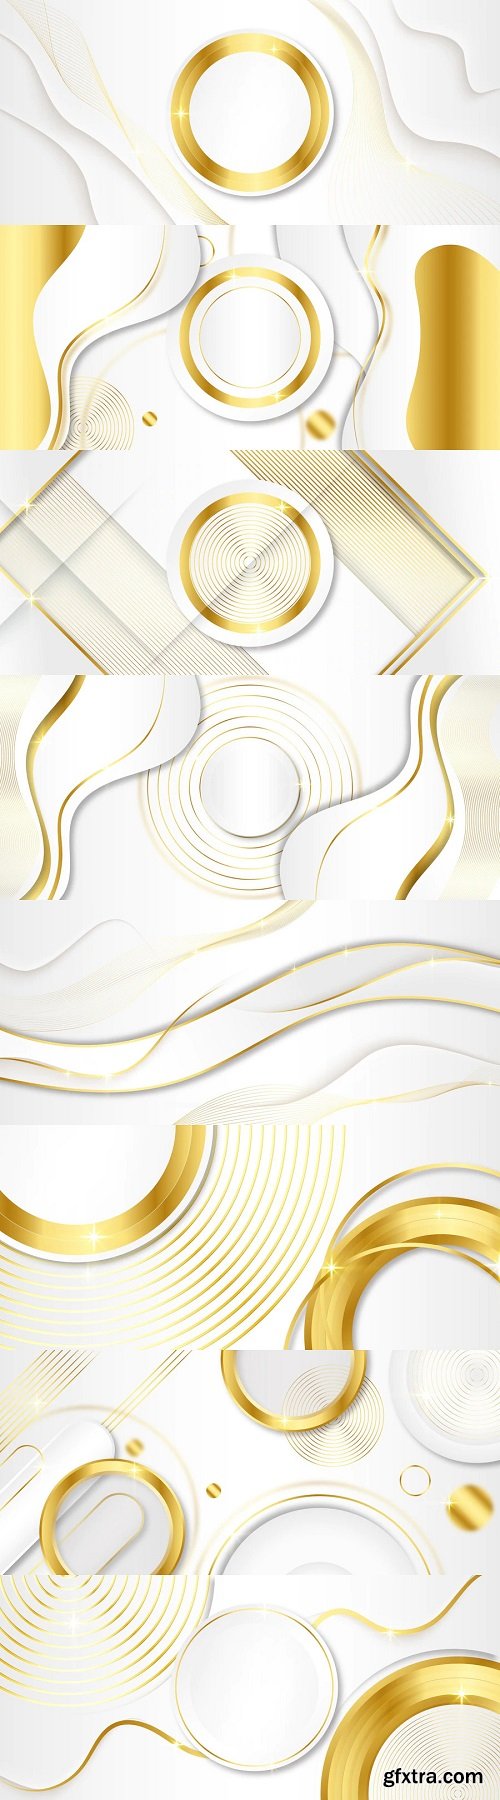 Modern white and gold abstract background